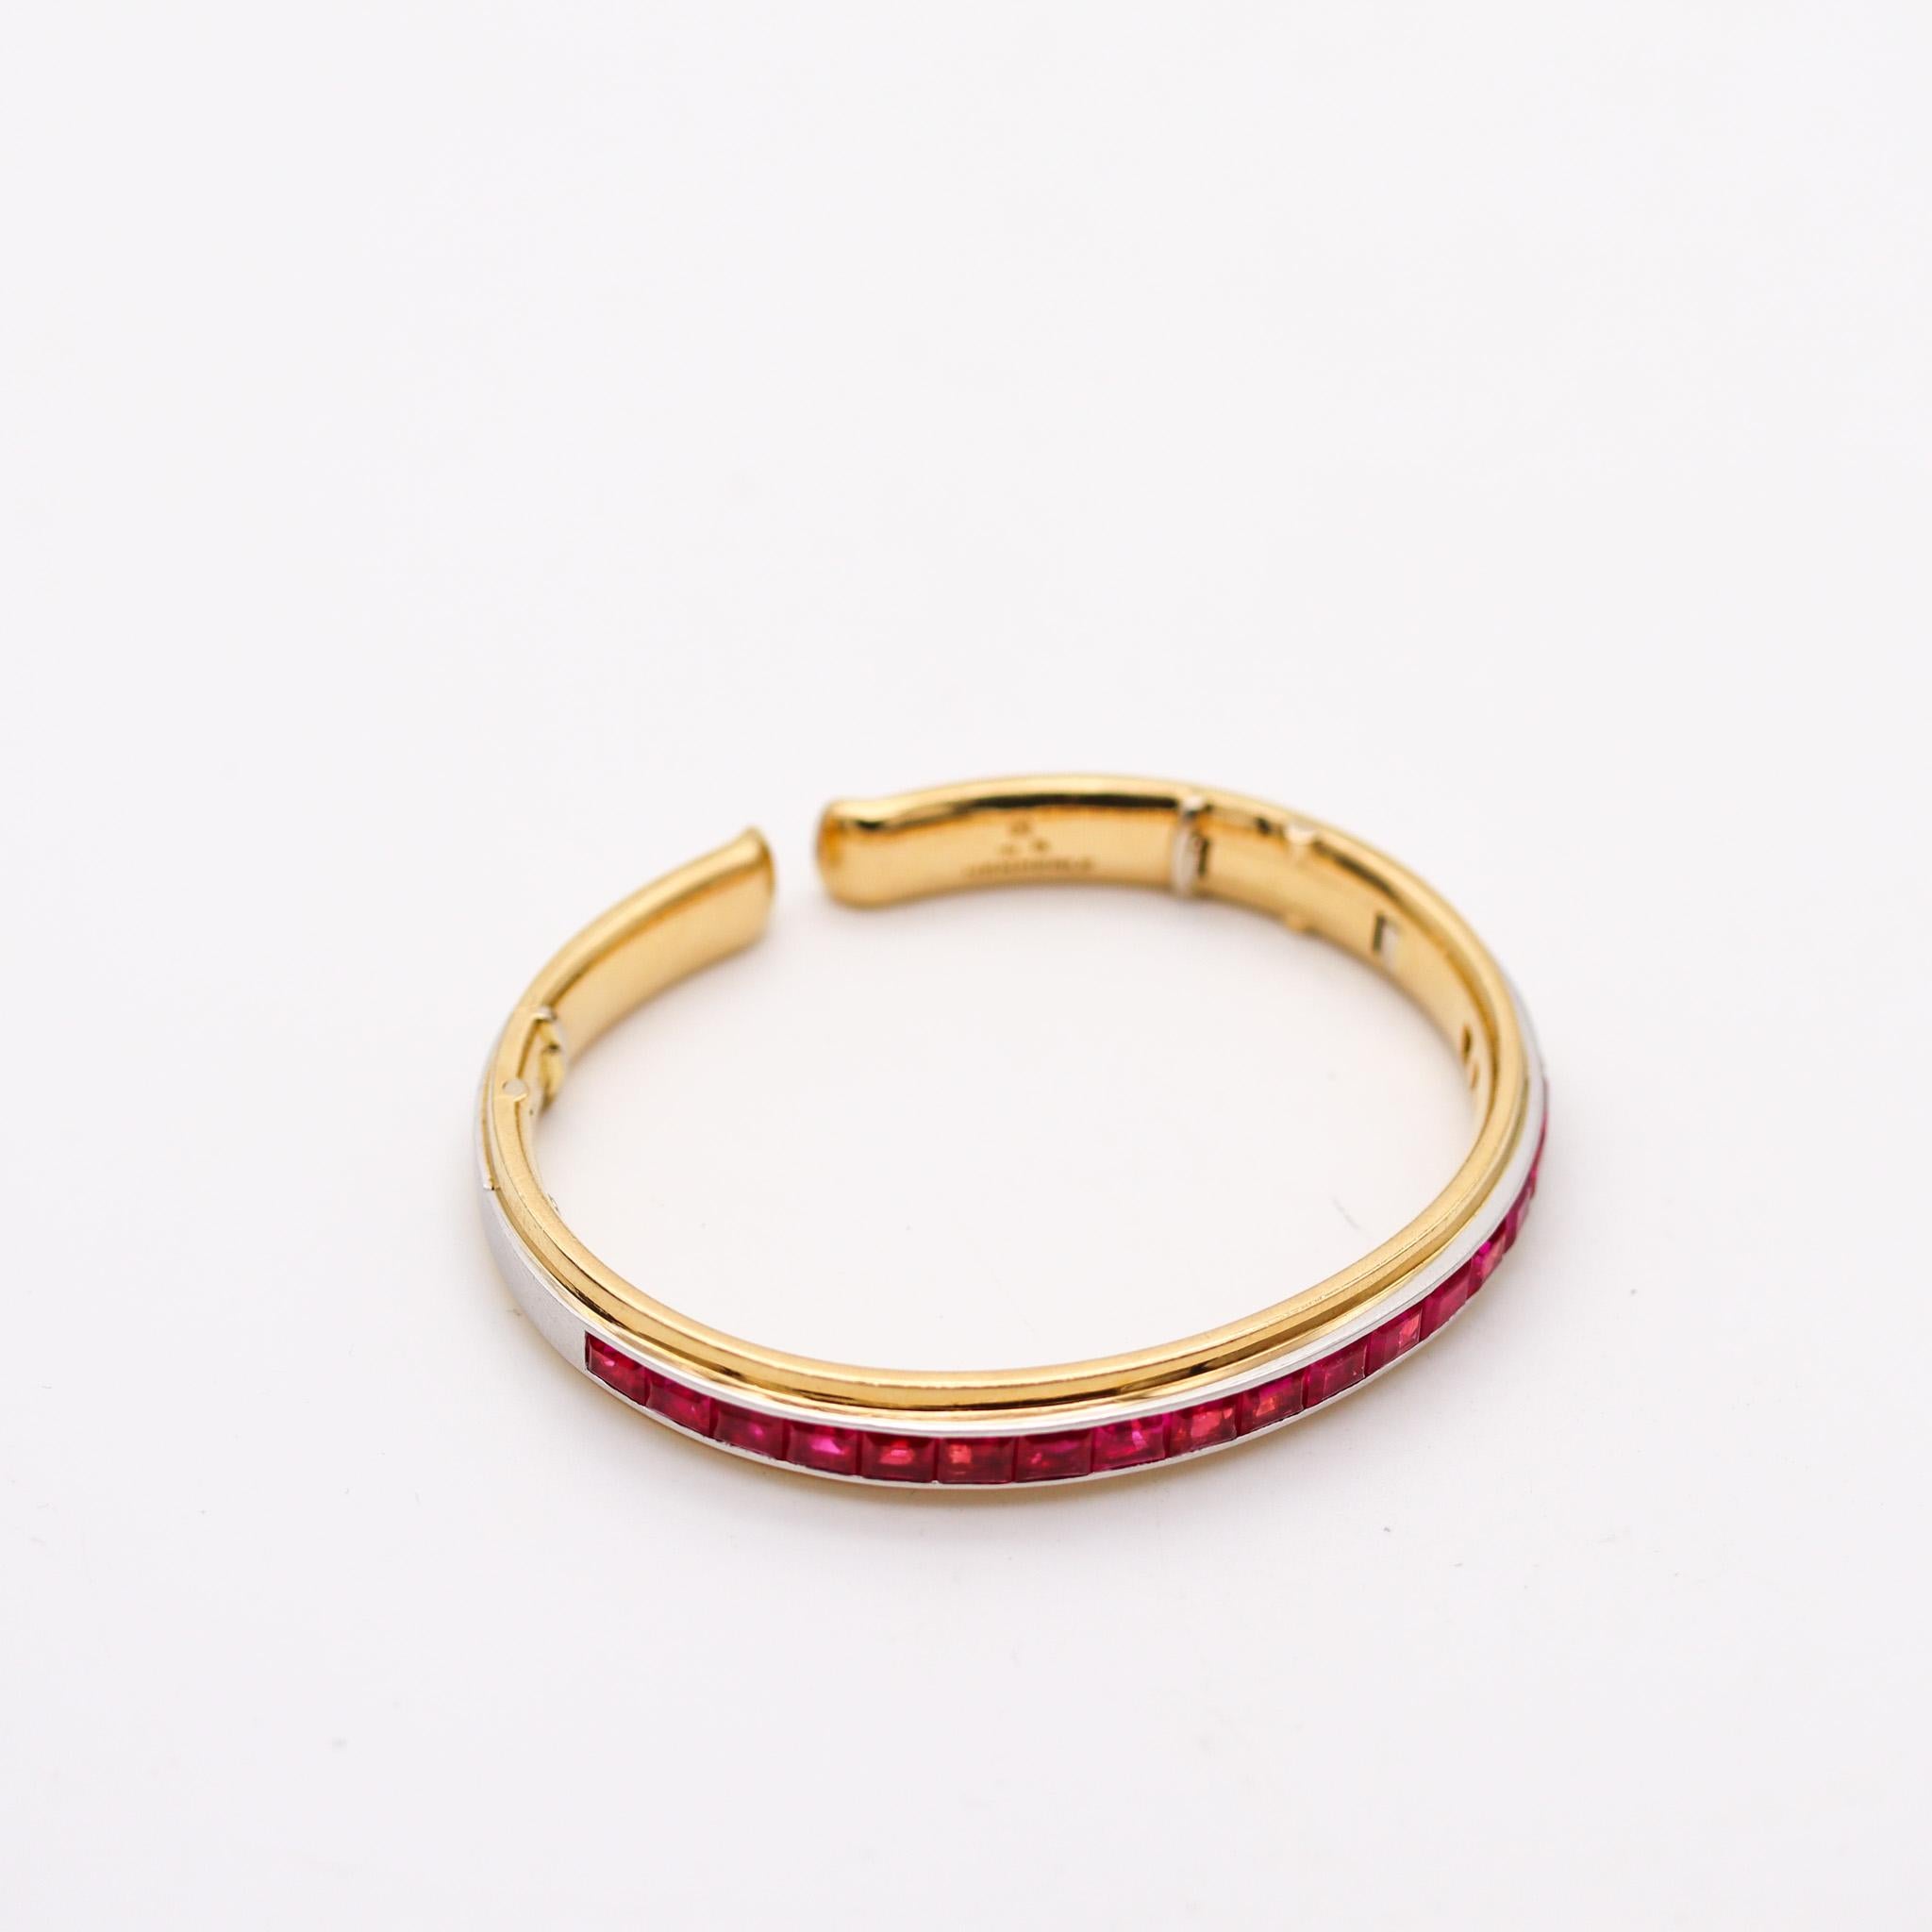 Hemmerle Bangle Bracelet In 18Kt Gold And Platinum With 22.65 Ctw Red Rubies For Sale 1